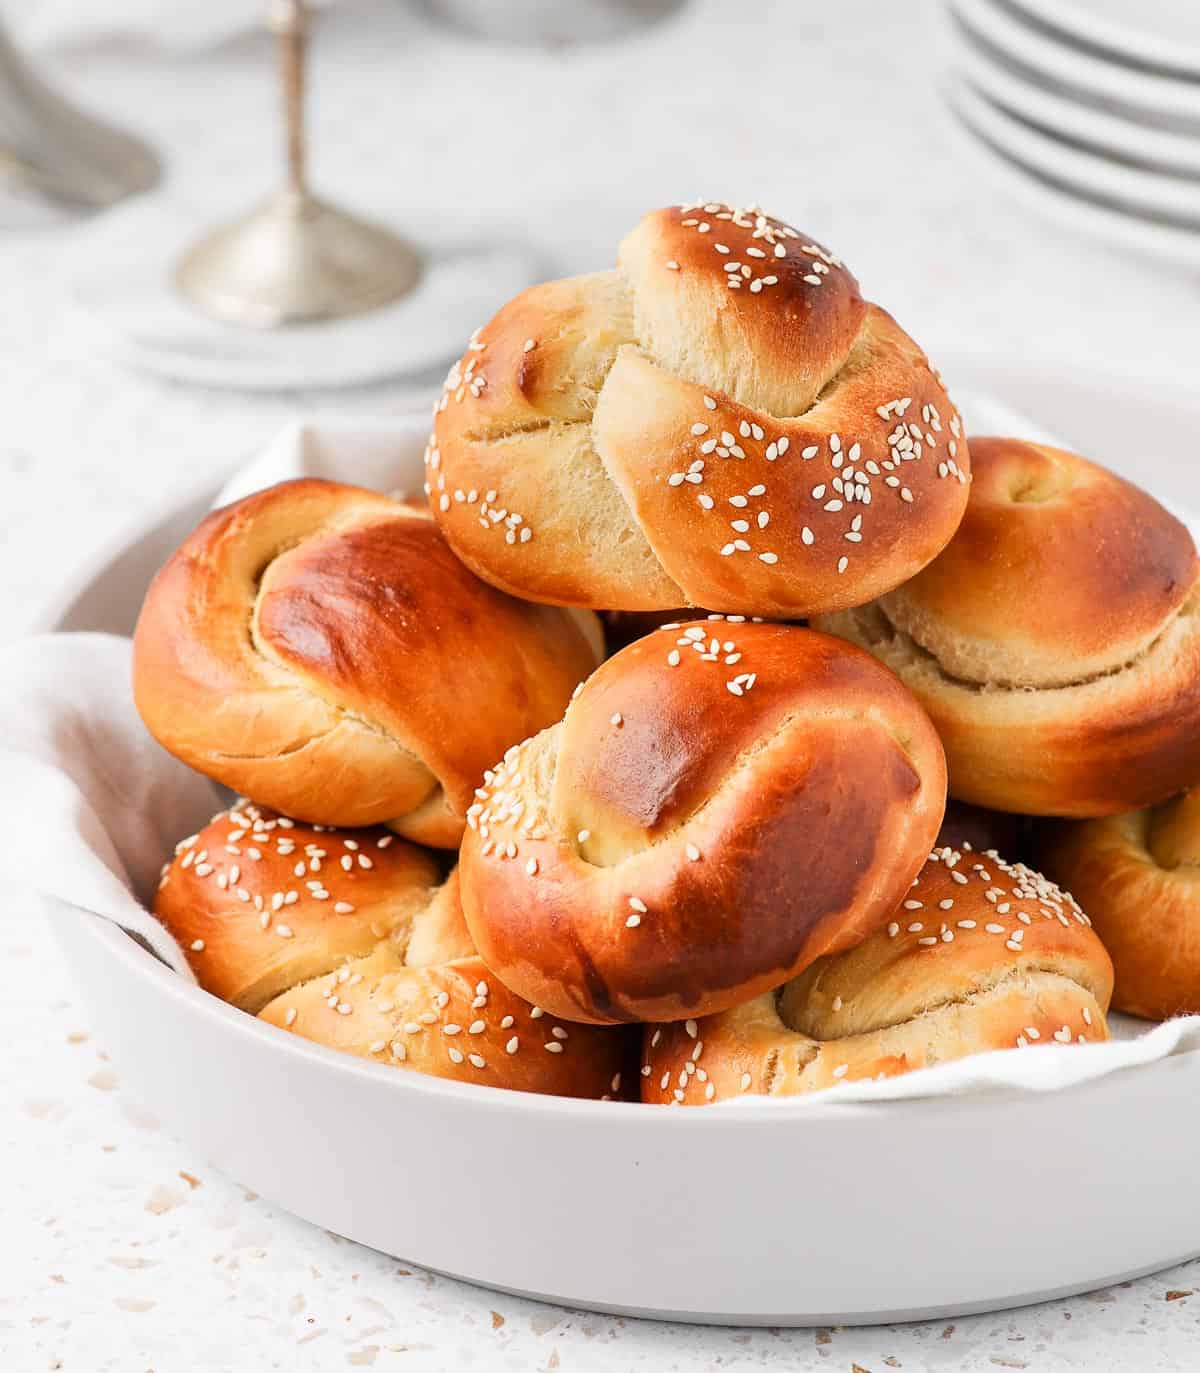 Rolls stacked in a large light grey bowl.